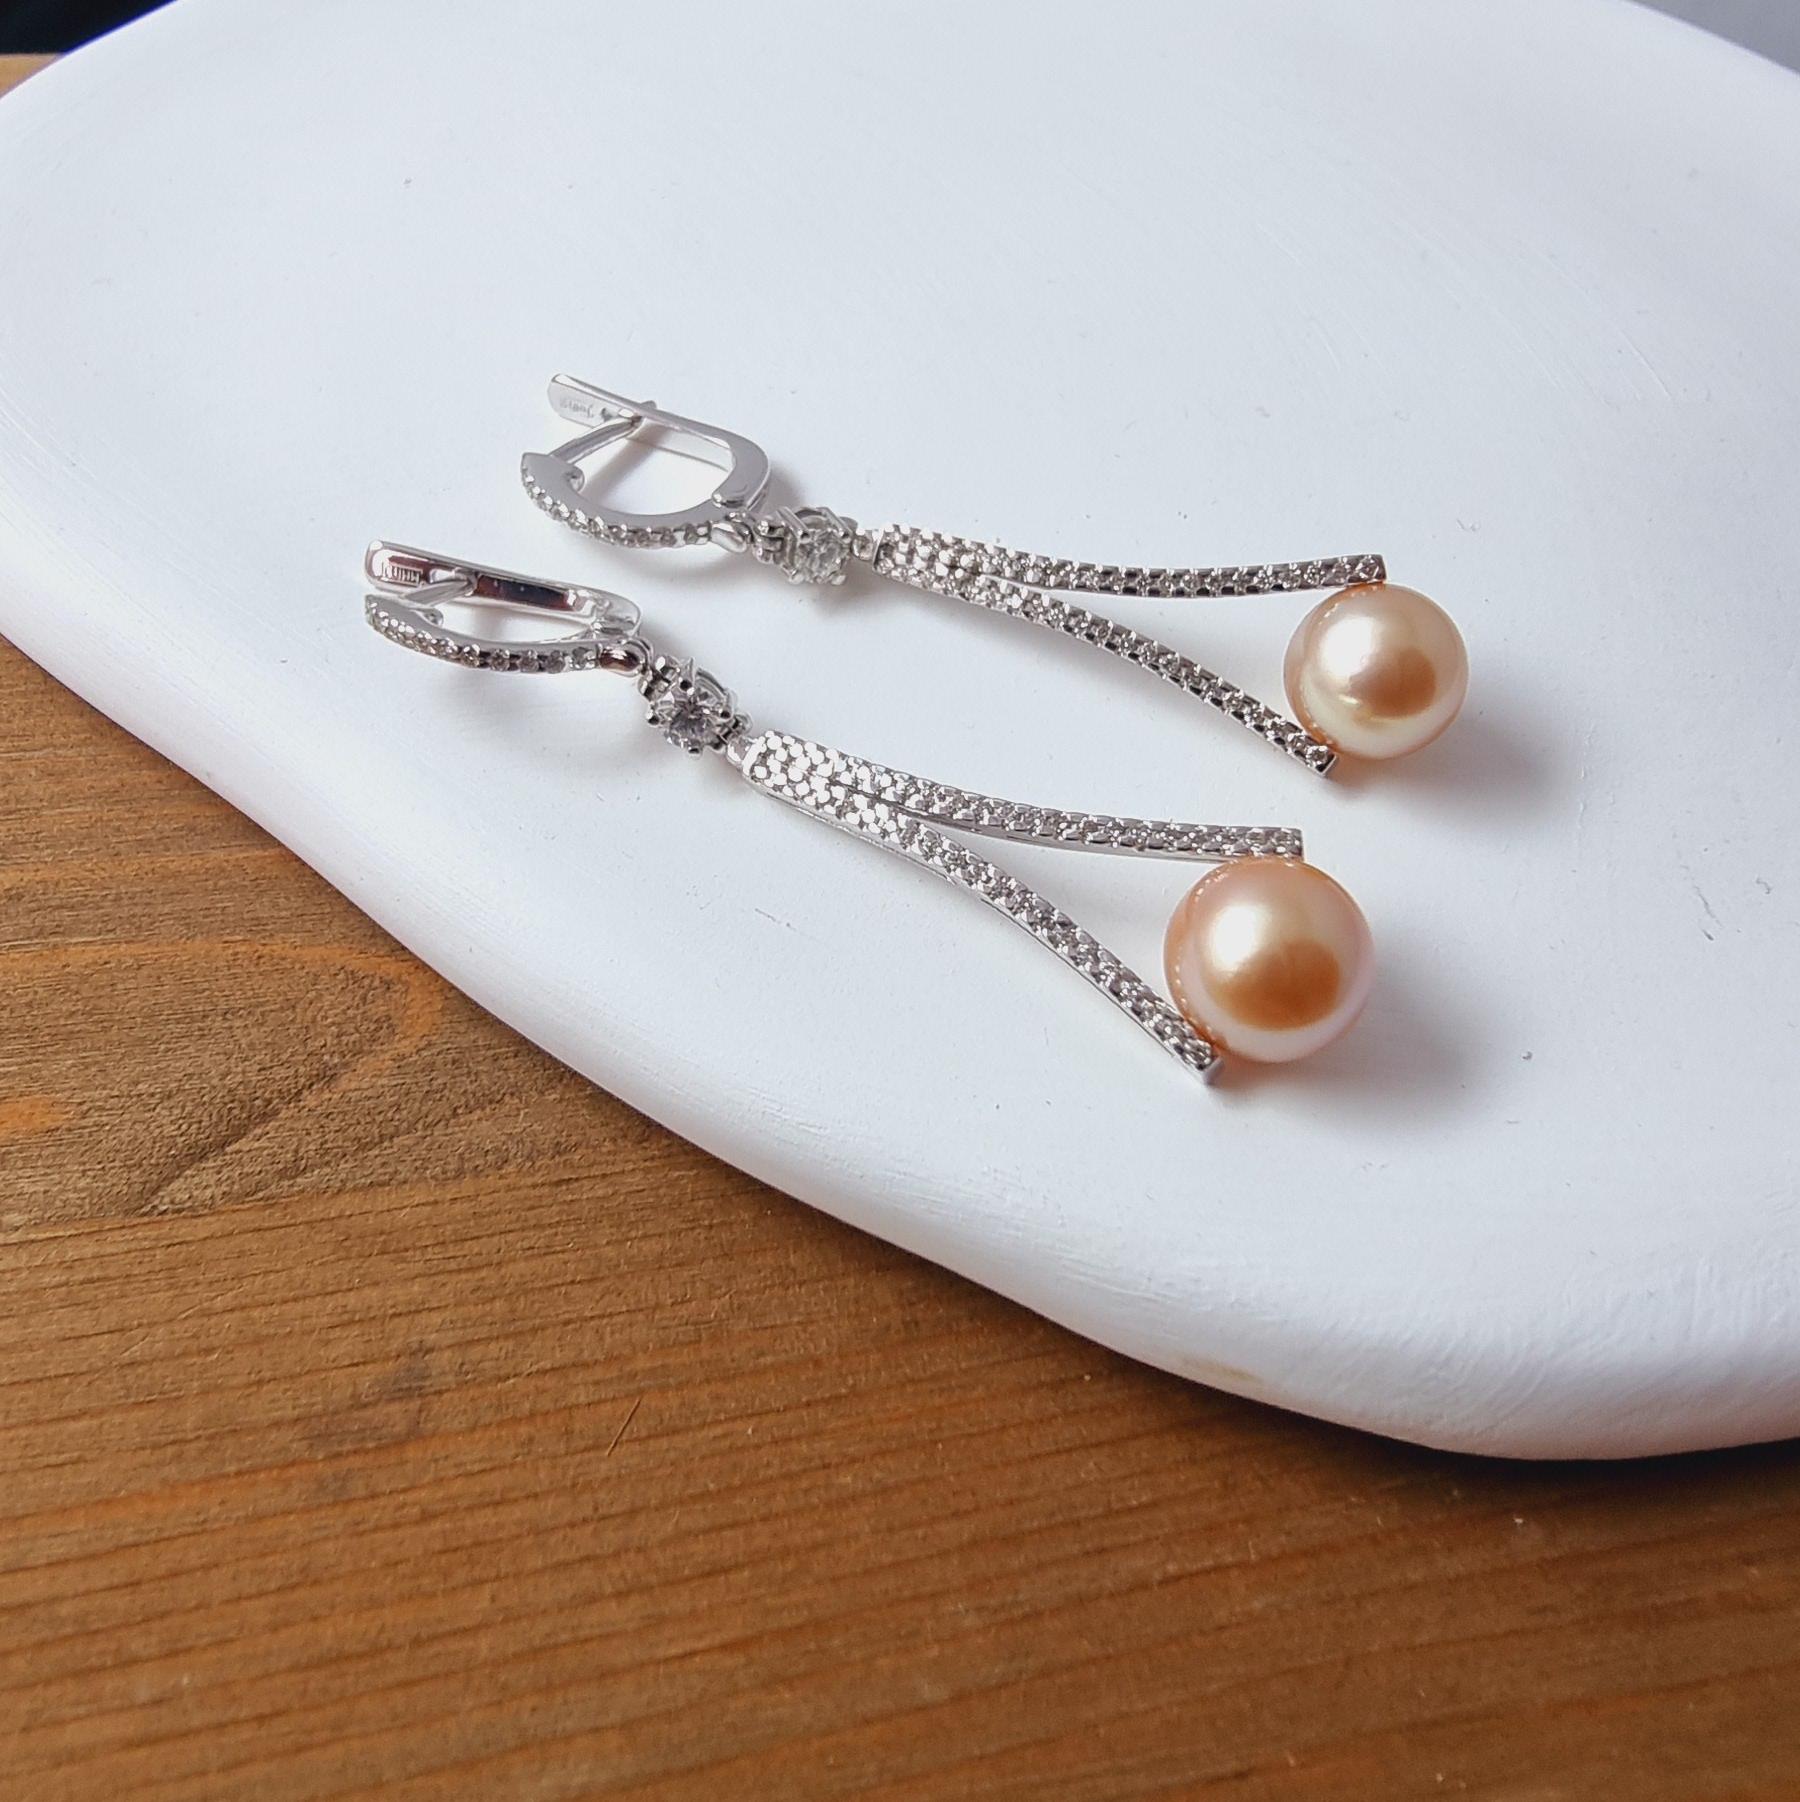 Round Cut Diamonds and Cultured Pearl Earrings in 14k White Gold